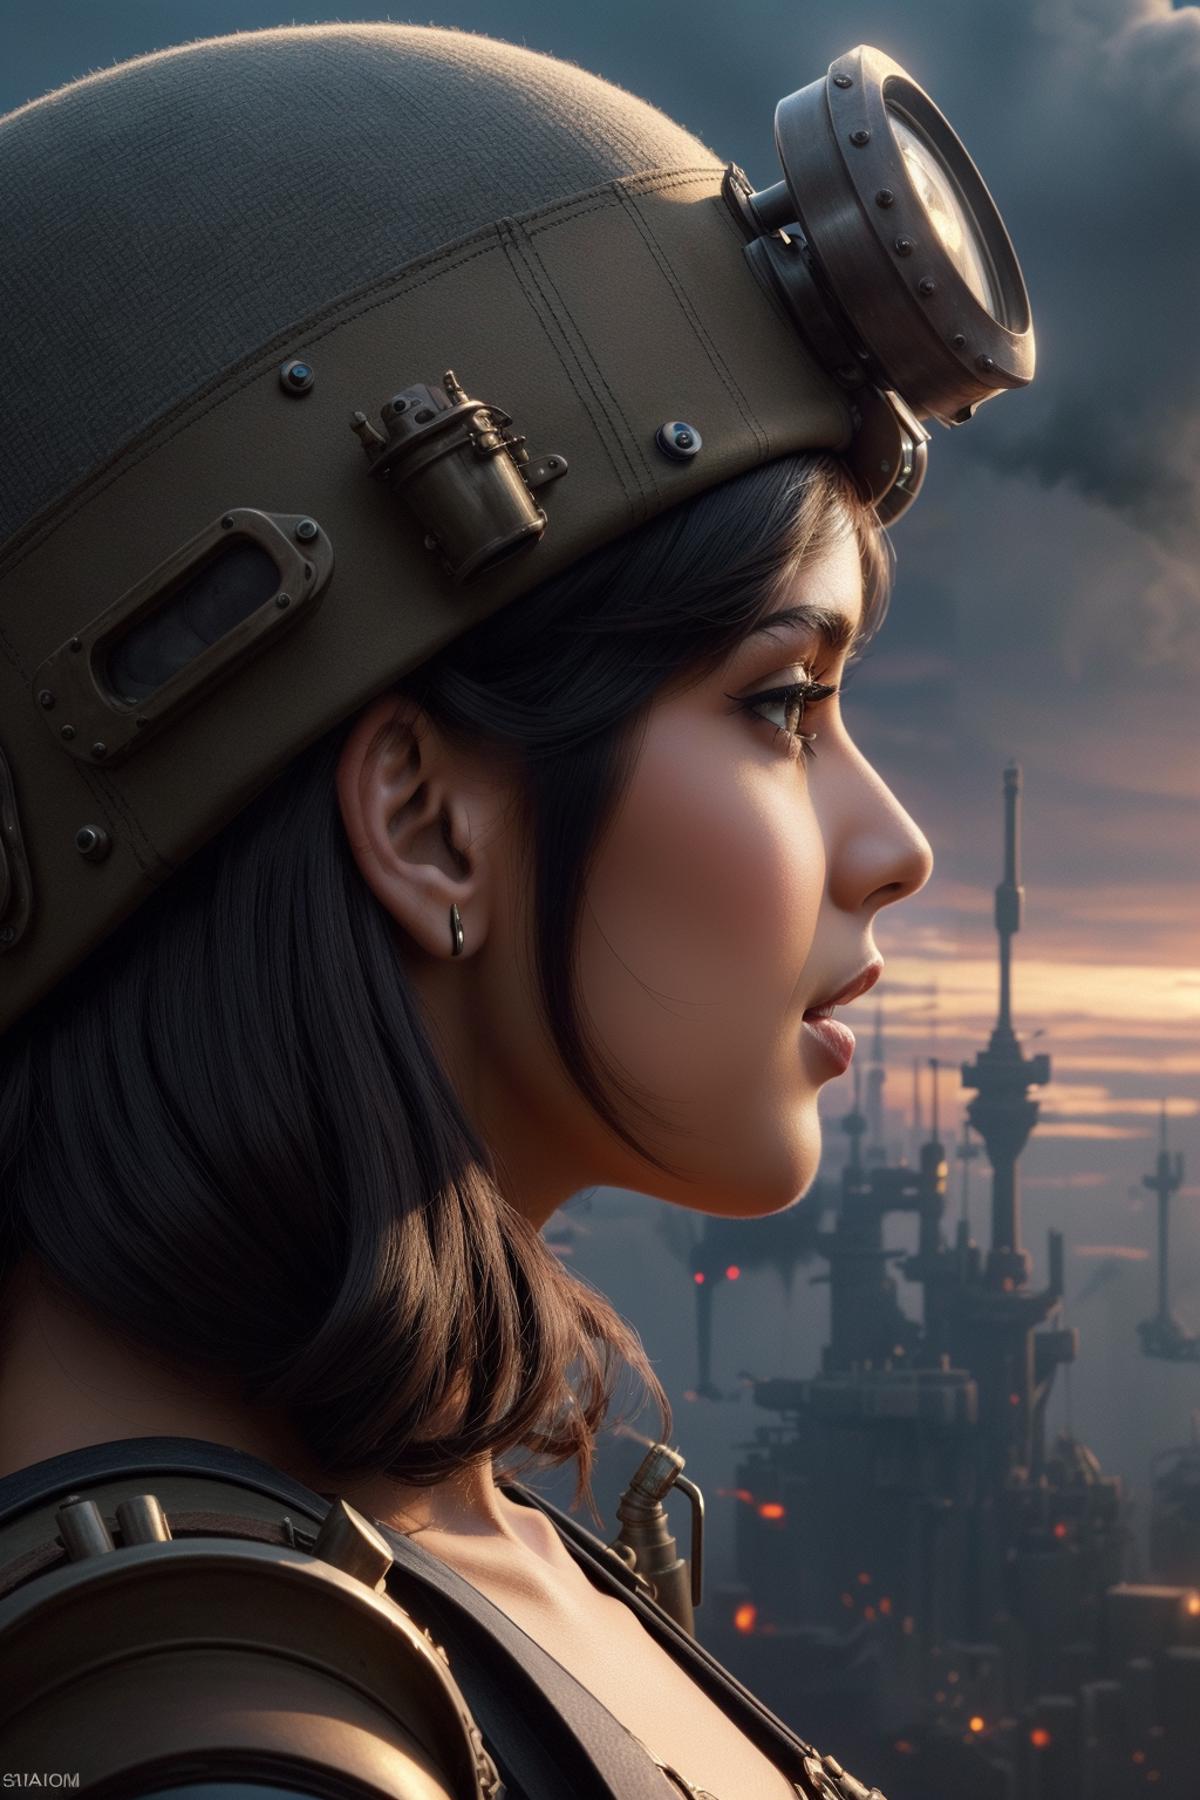 A woman wearing a helmet gazes into the distance, with a futuristic city in the background.